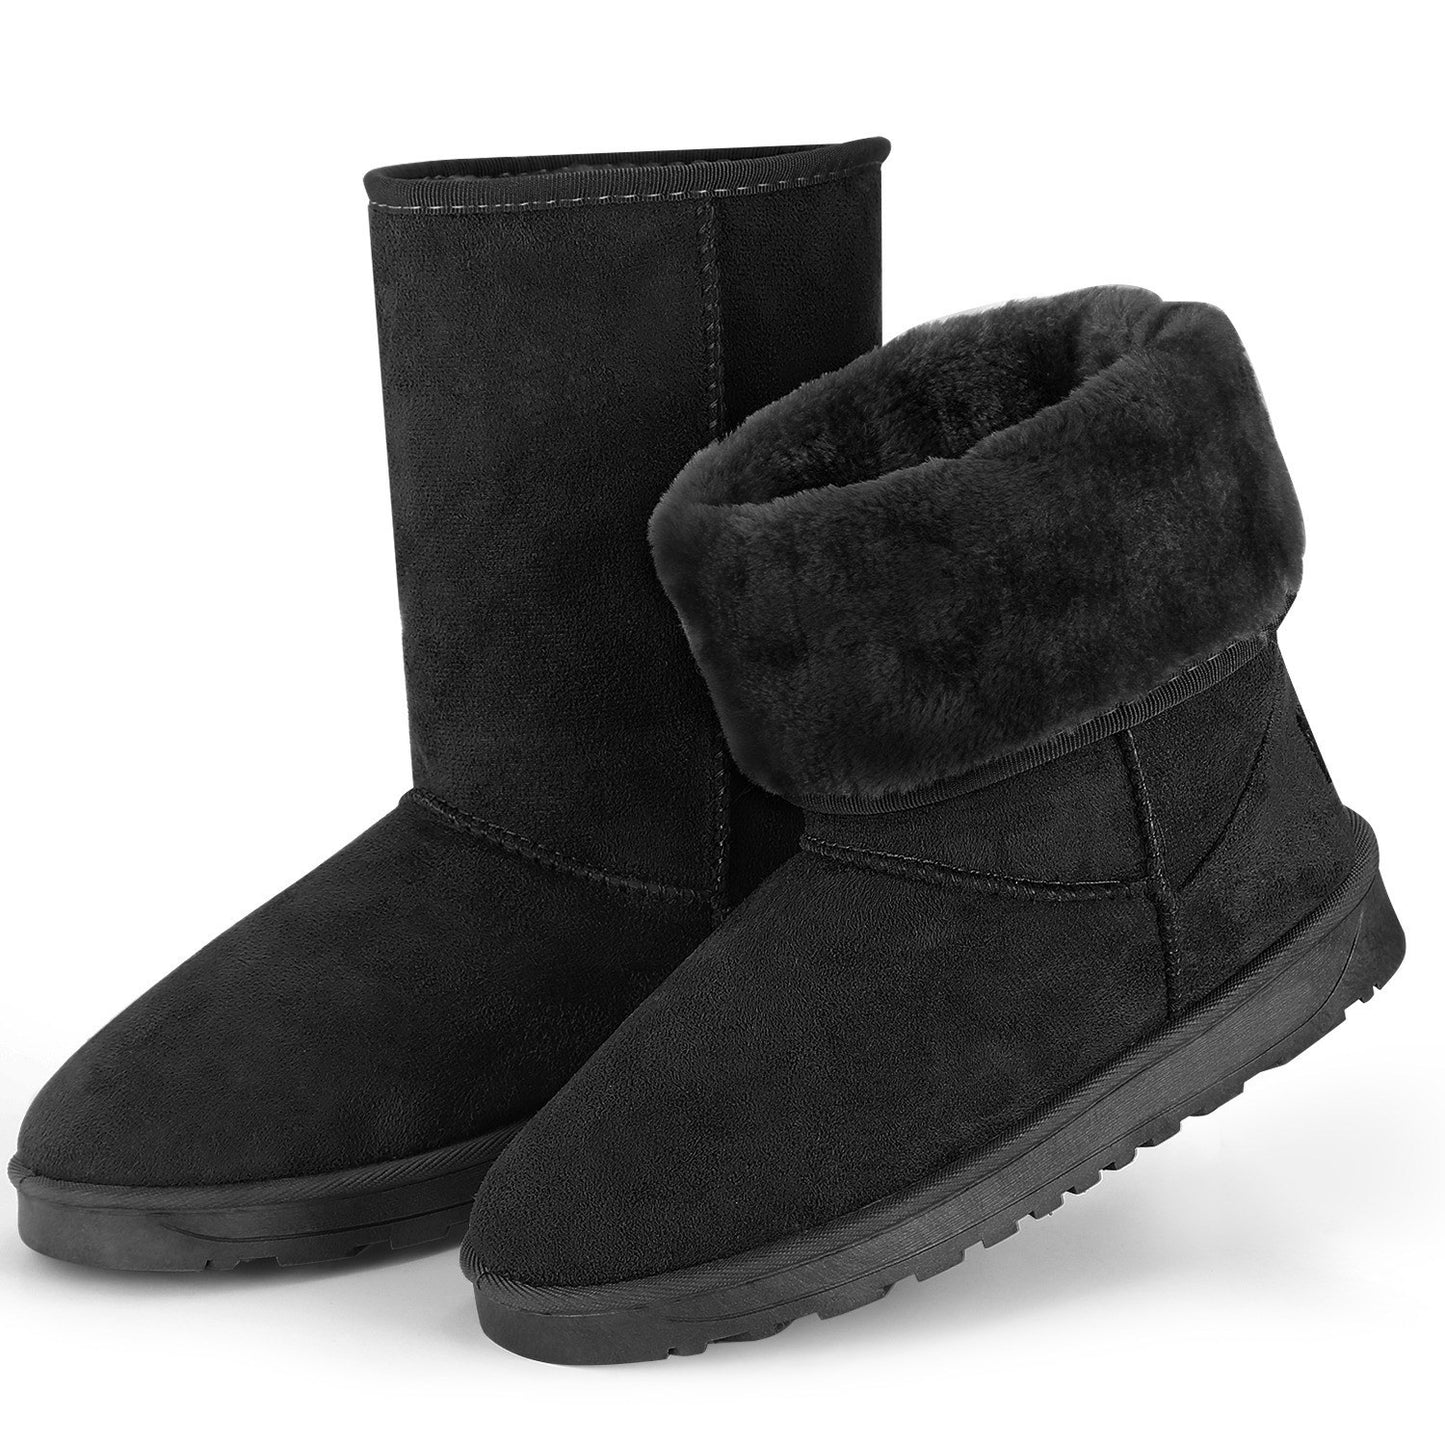 Women Ladies Snow Boots Waterproof Faux Suede Mid-Calf Boots Fur Warm Lining Shoes